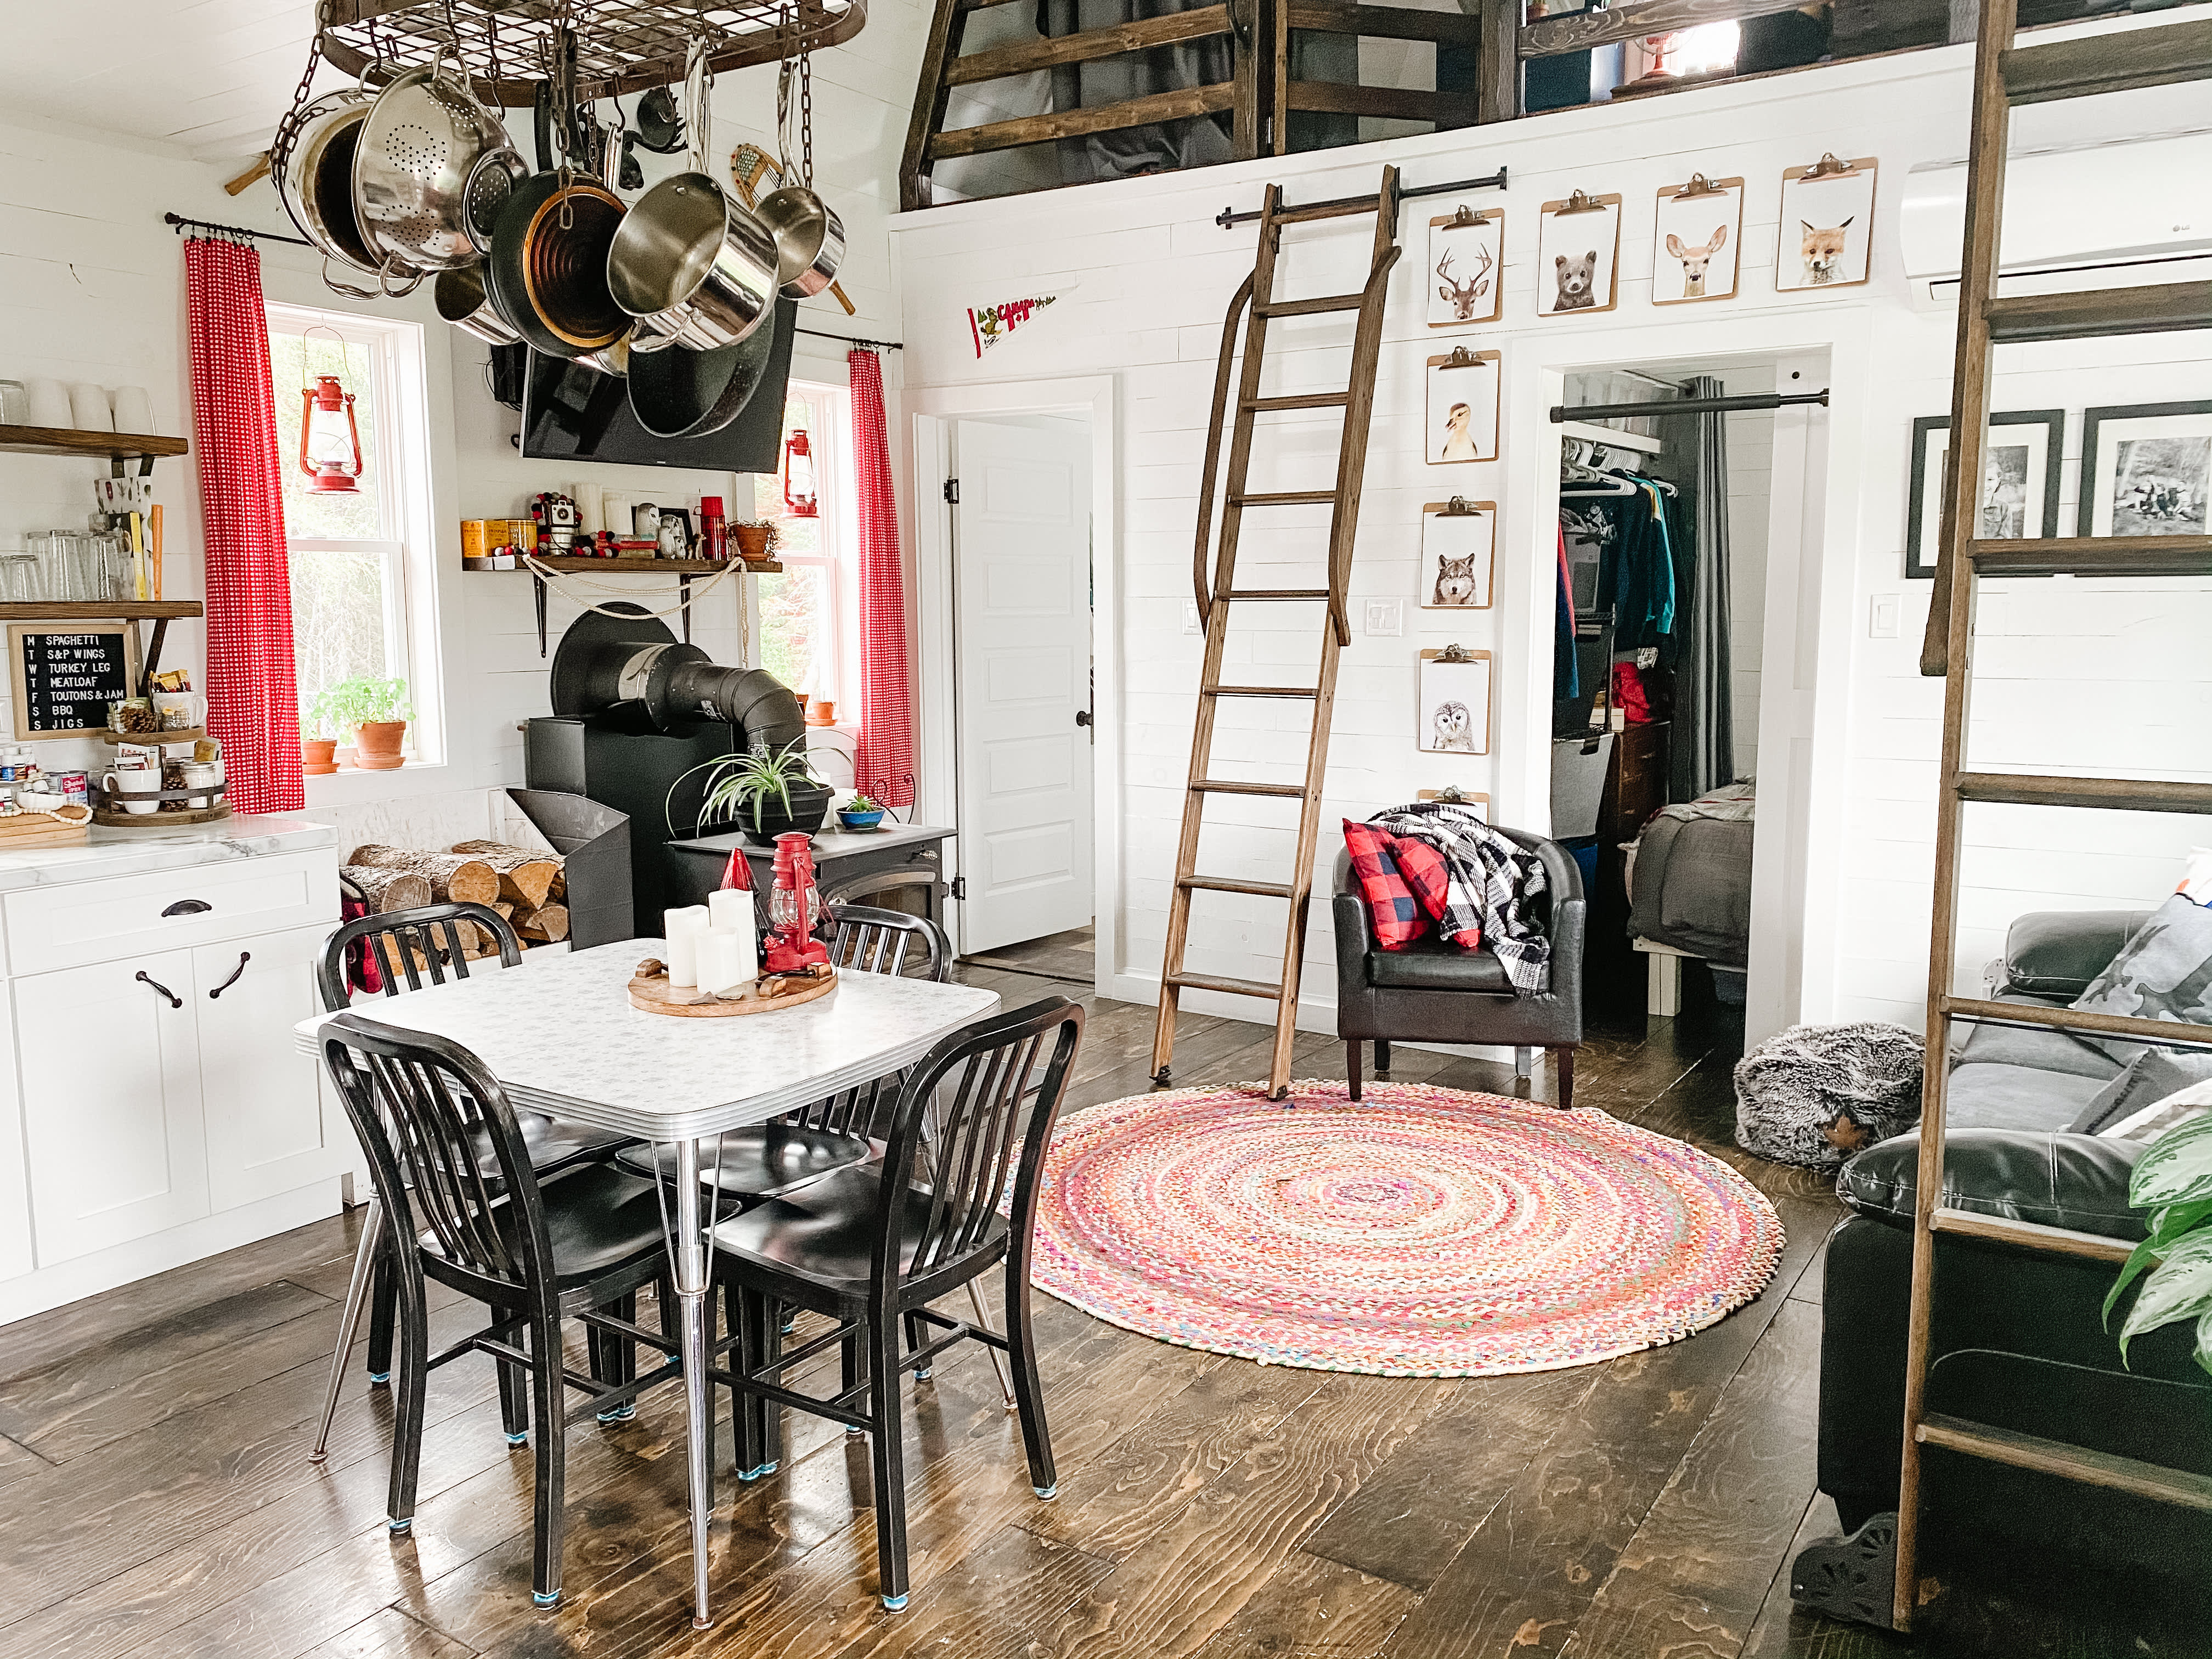 Family of 5 Sharing 800-Square-Foot Barn House | Apartment Therapy